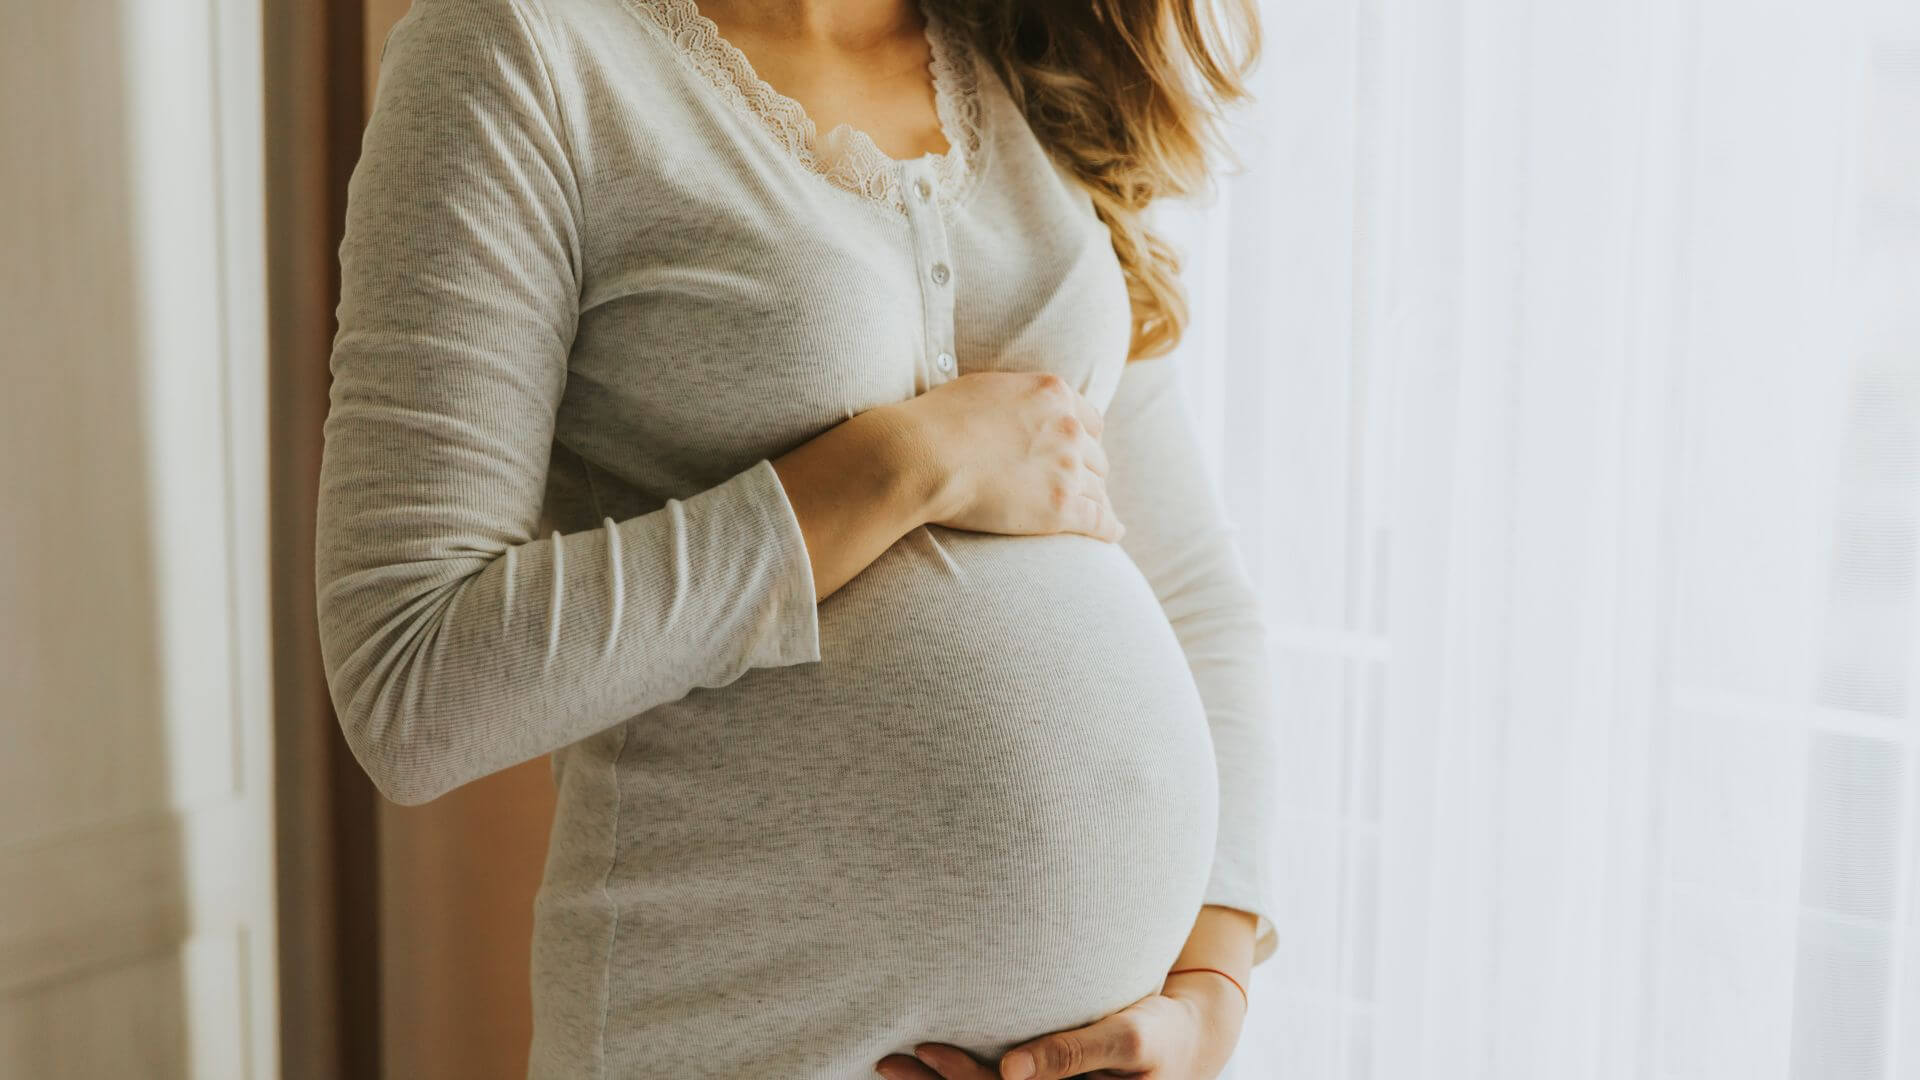 What Insurance Plans Can You Purchase While Pregnant